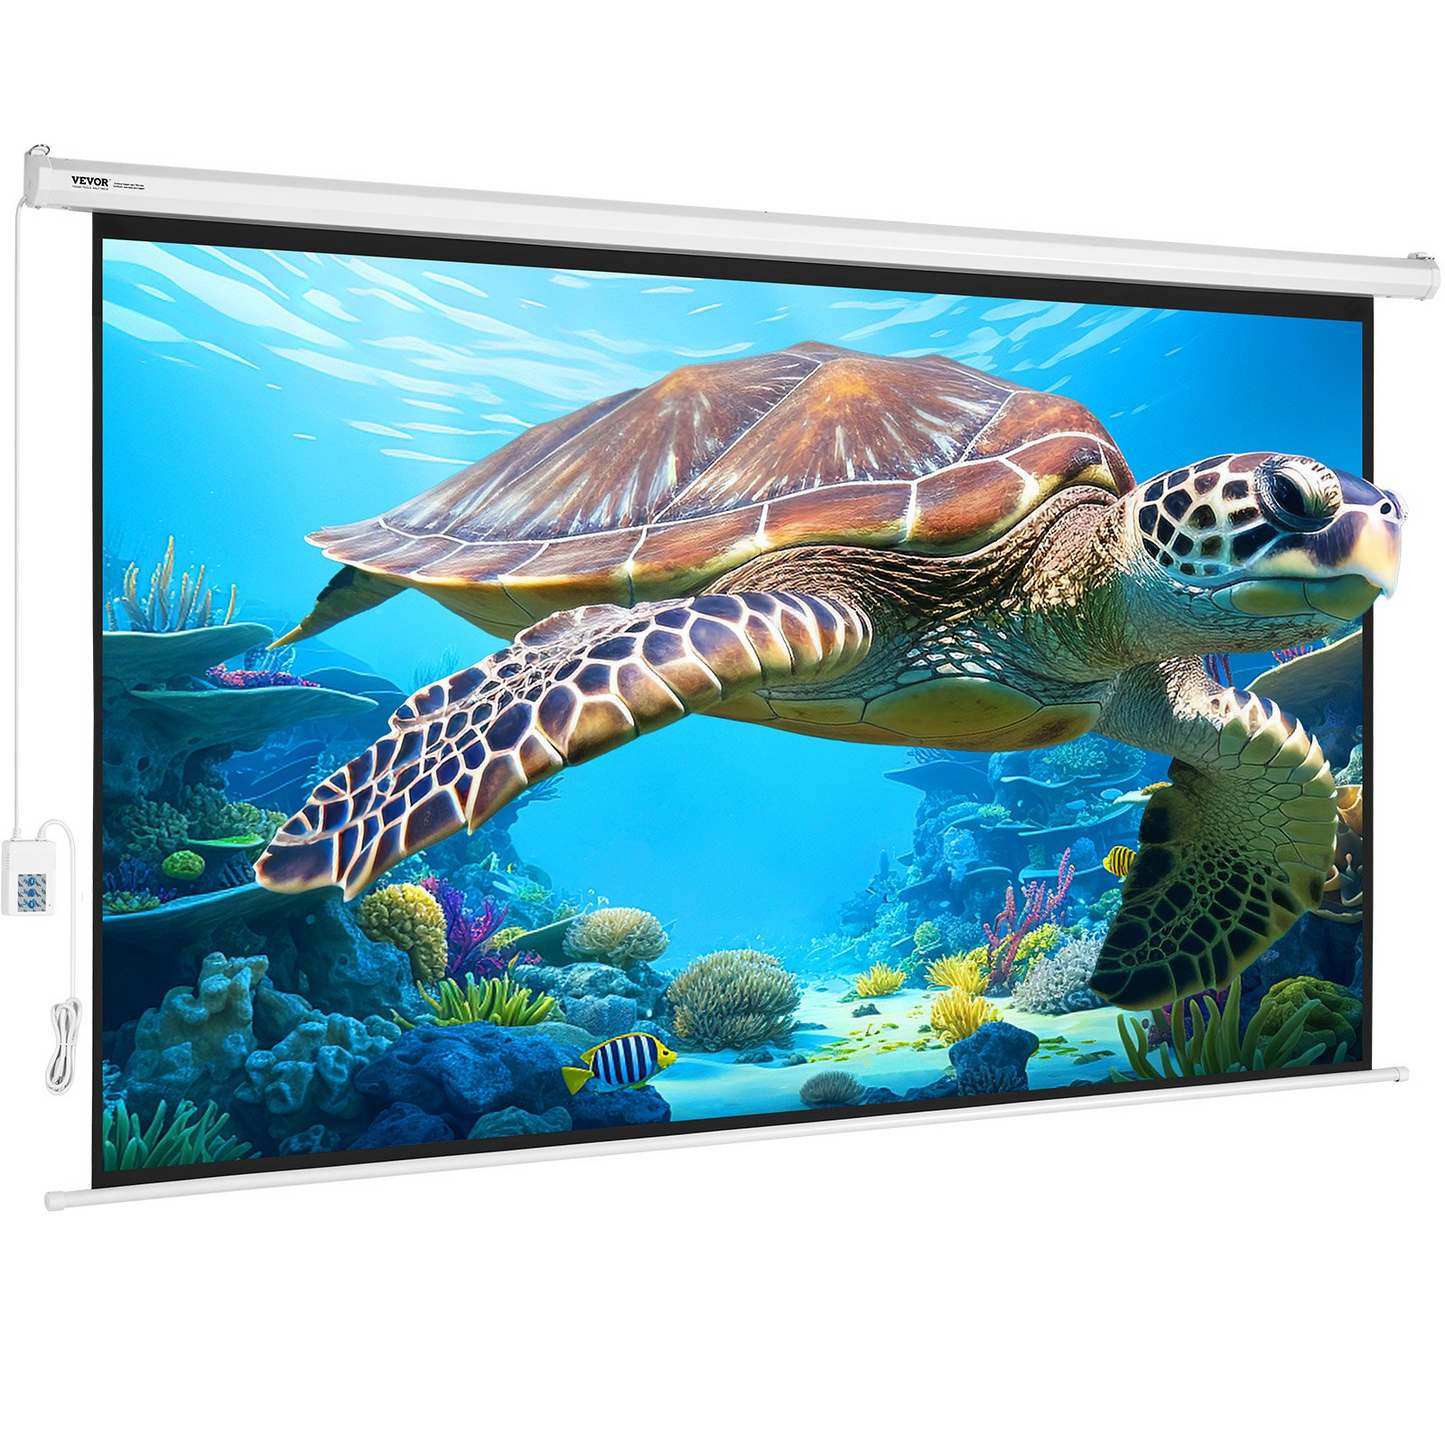 VEVOR Motorized Projector Screen 100 inch, 16:9 4K 1080 HD Automatic Projection Screen, Electric Projector Screen with Remote Control, Wall Mount Movie Screen for Family Home Office Theater, Goodies N Stuff